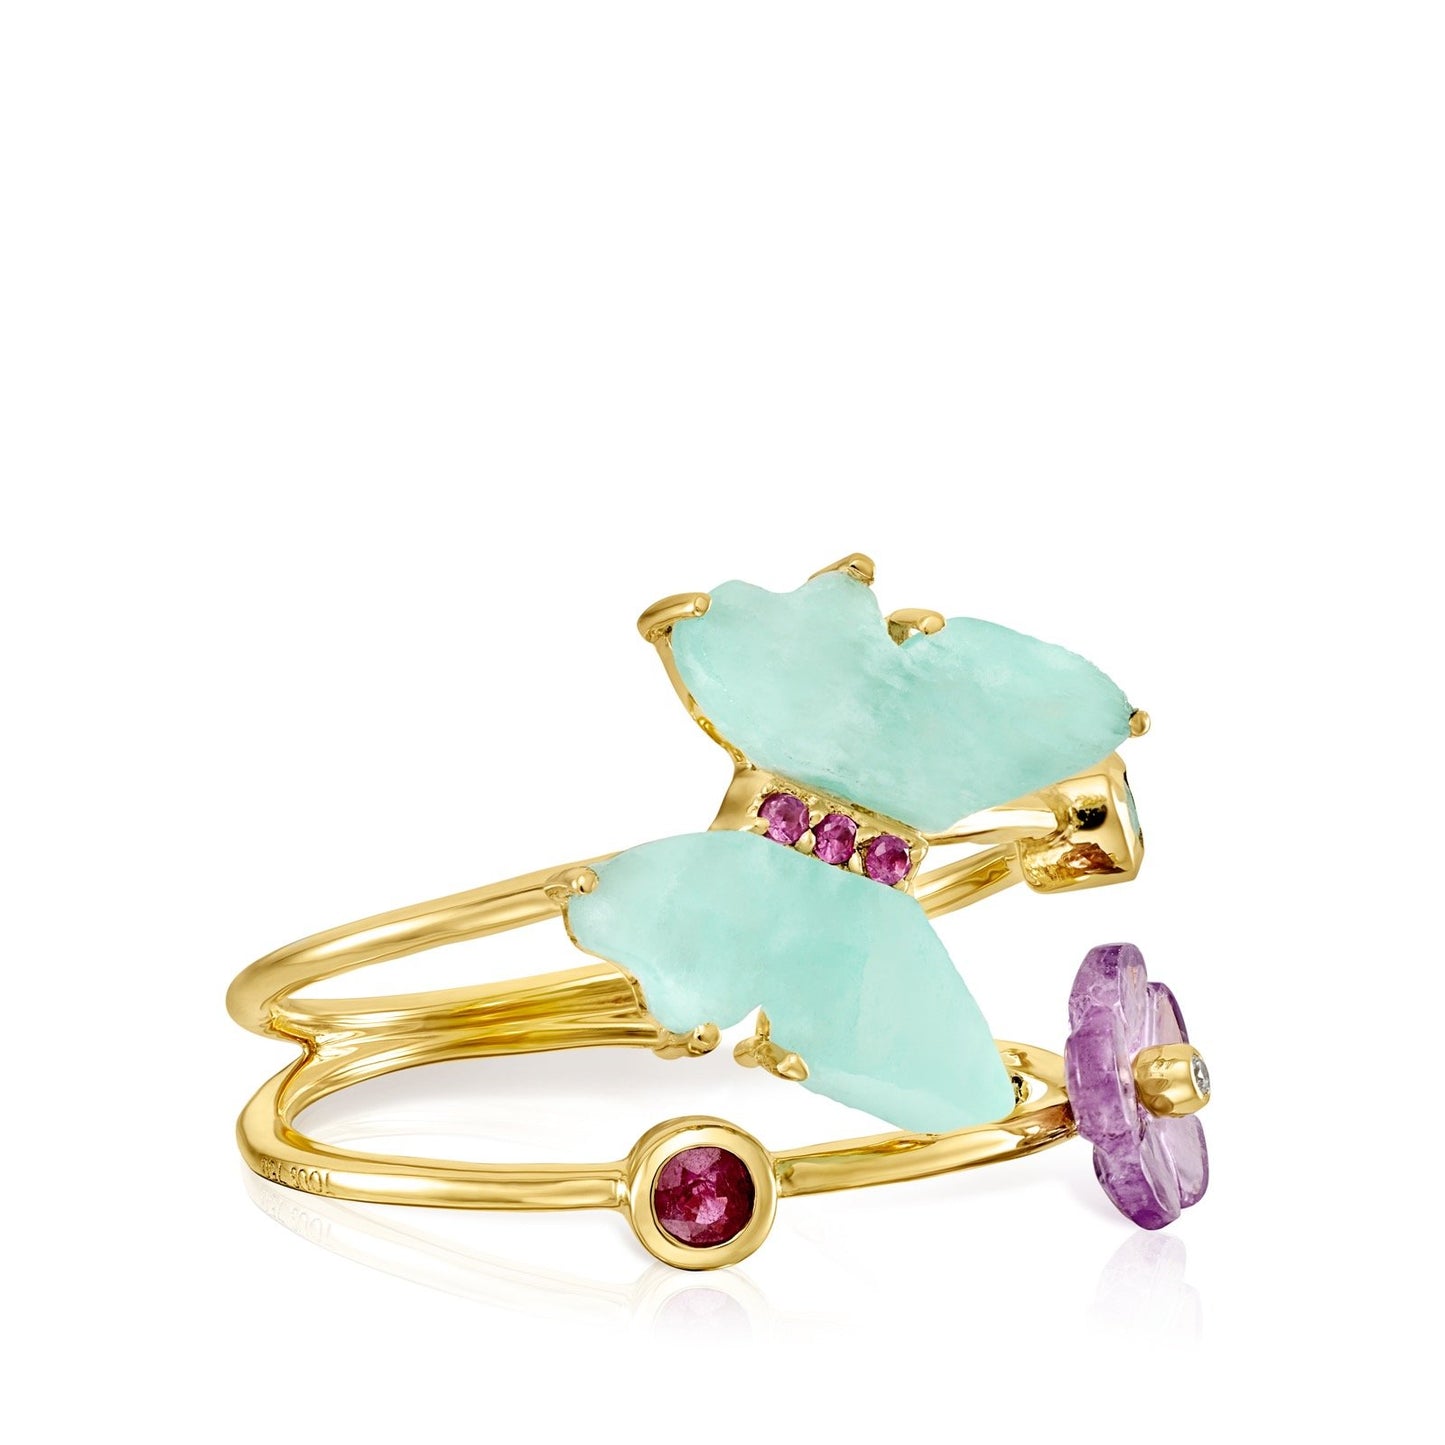 Tous Vita butterfly ring in Gold with Gemstones 918535000